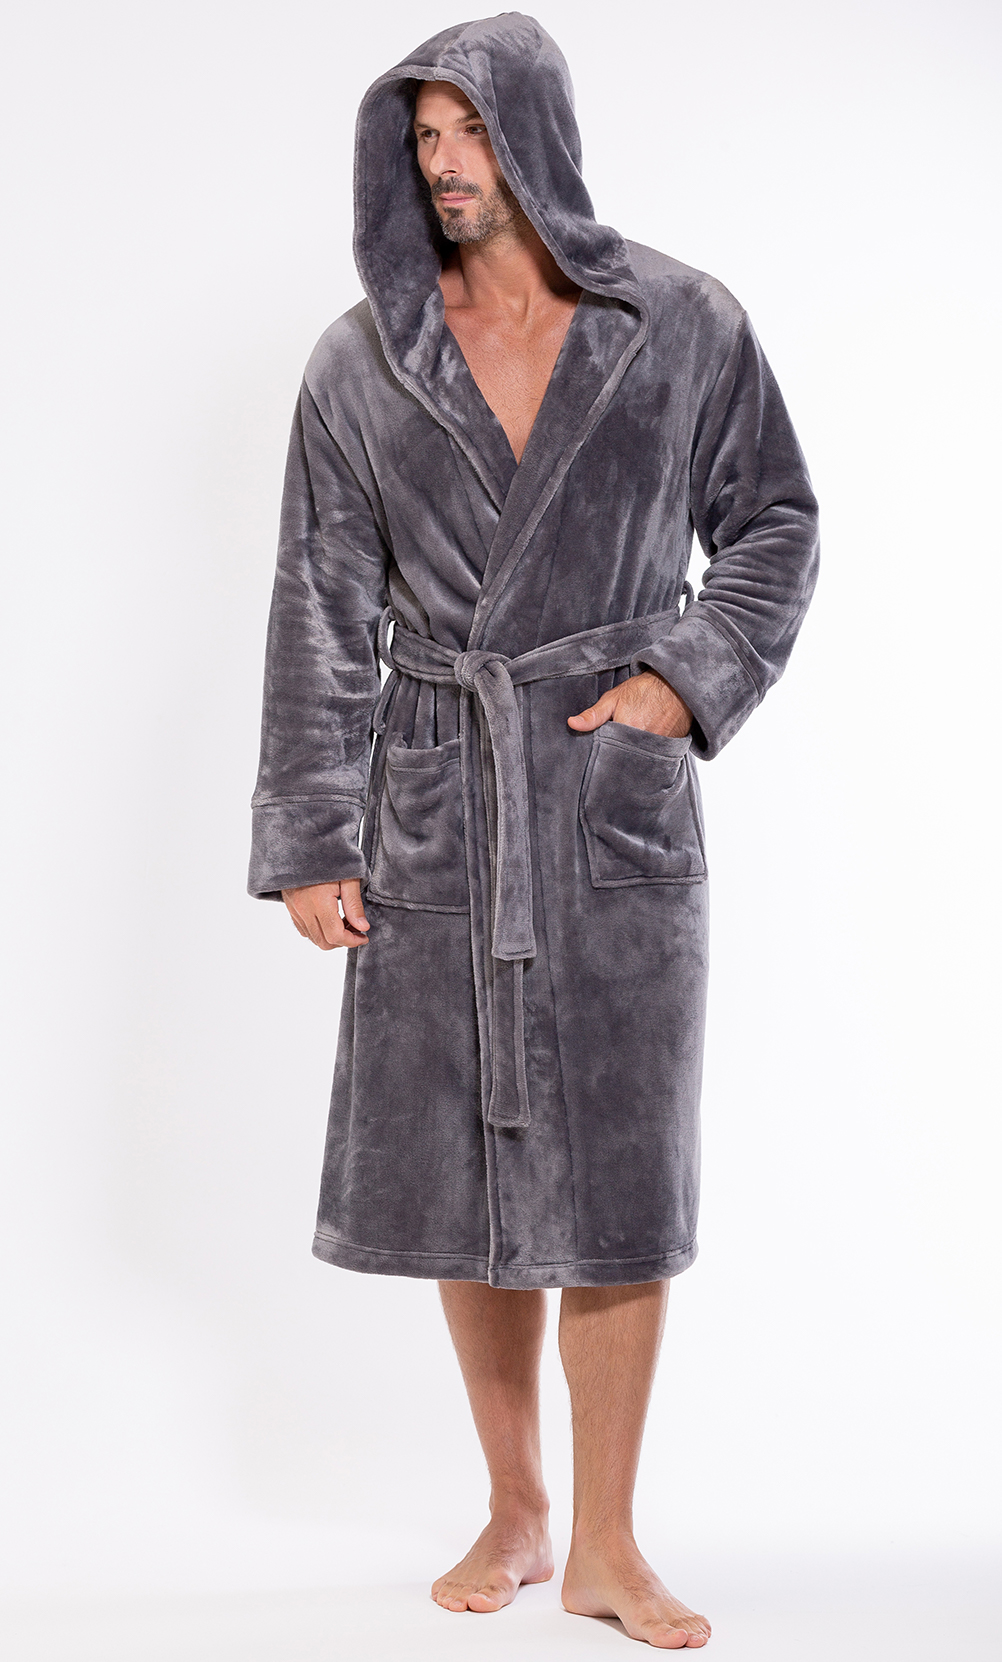 Mens Fleece Hooded Robe Soft Fluffy Thick Warm Dressing Gown With Hood  Nightwear